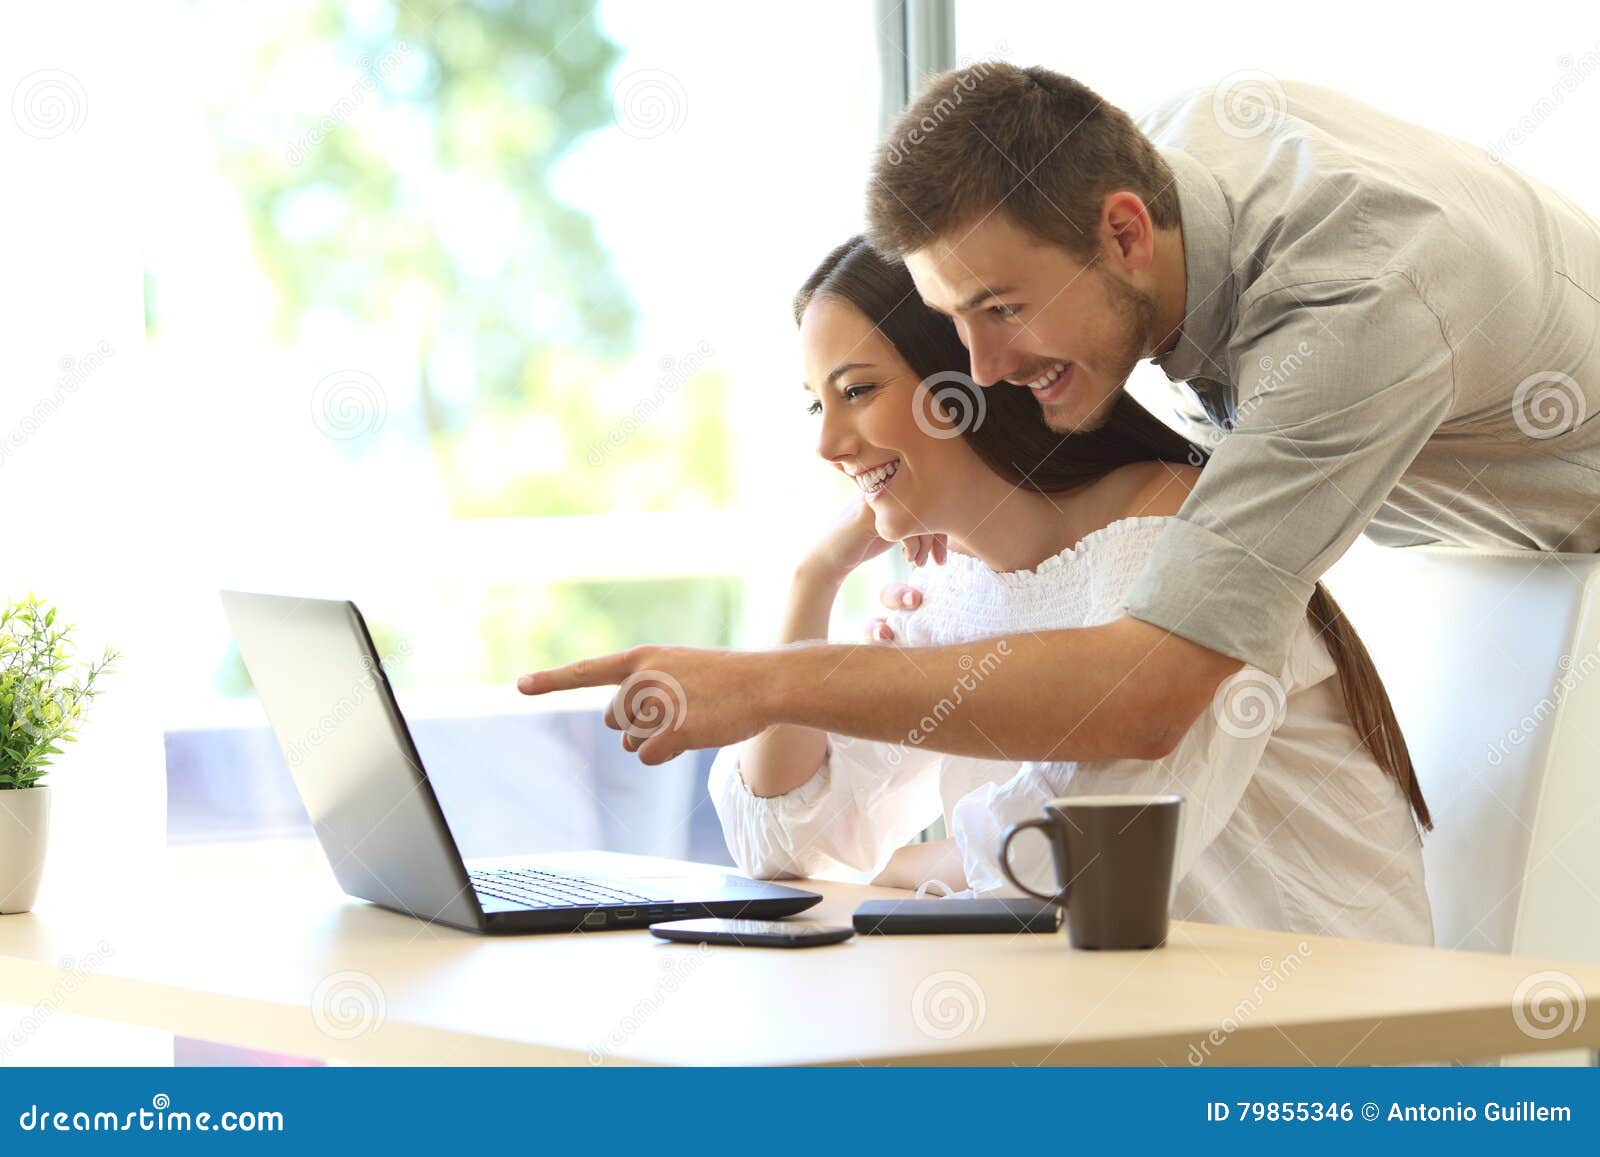 couple searching online in a laptop at home